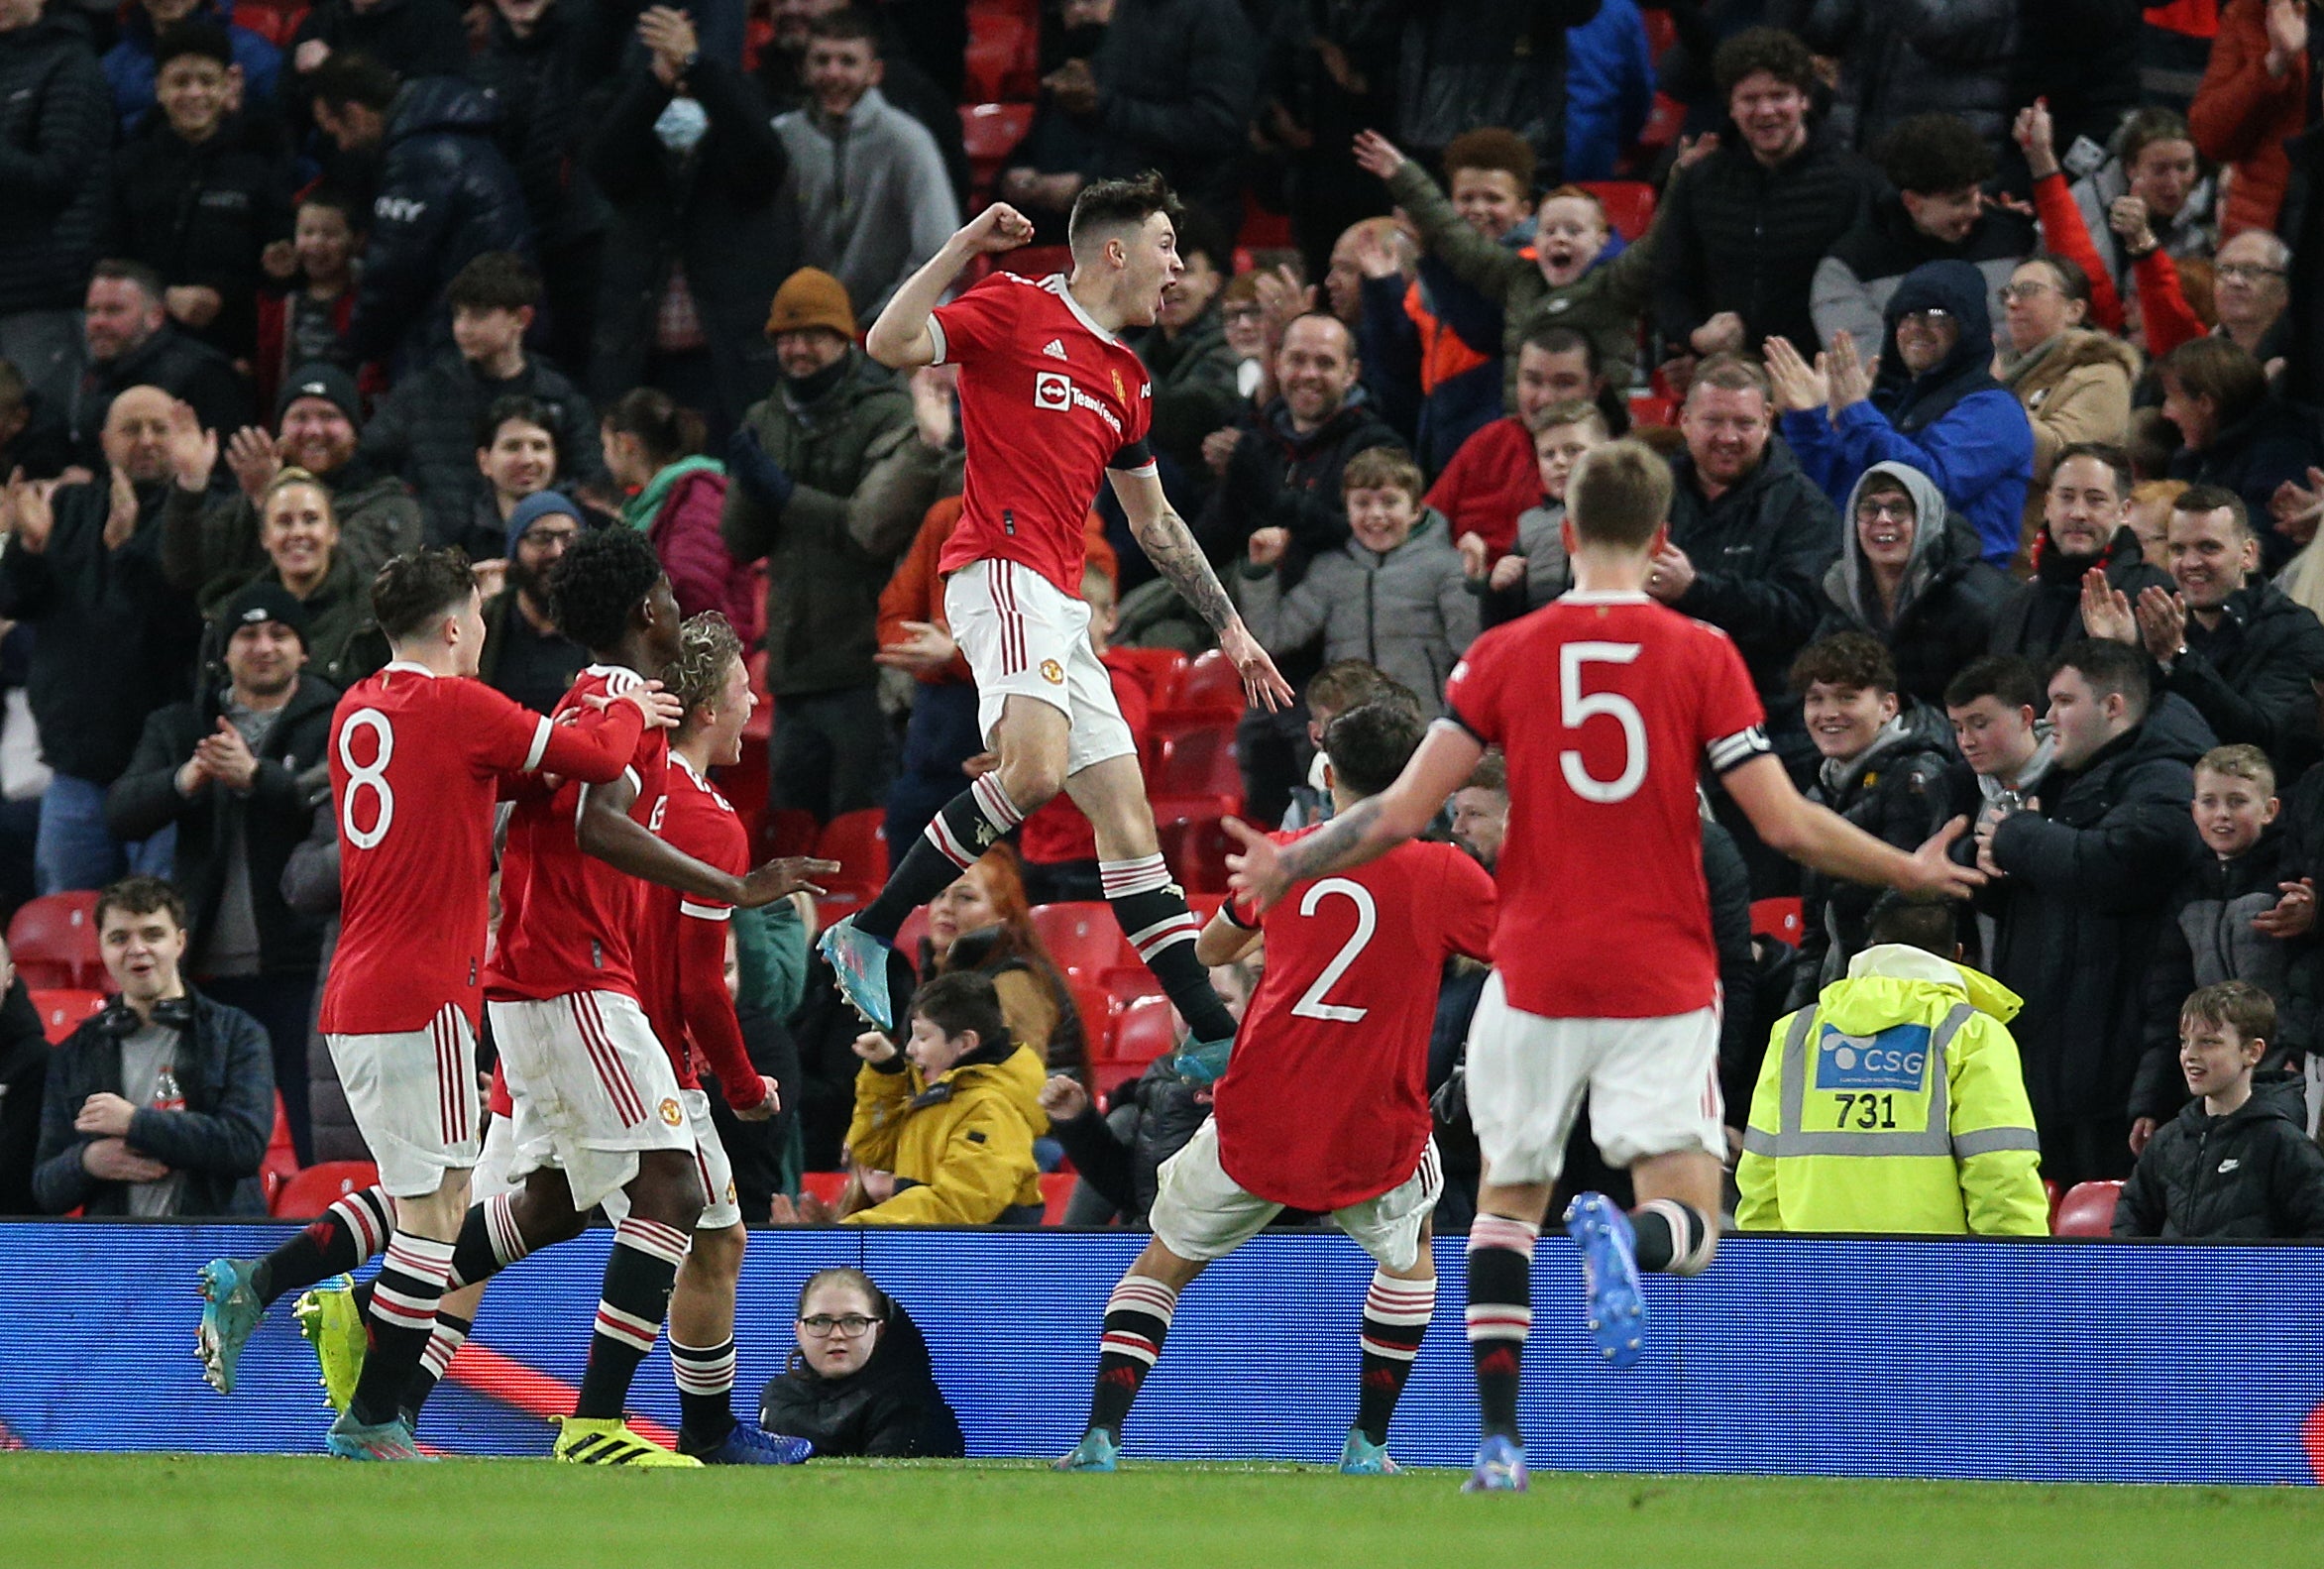 Manchester United are in the FA Youth Cup final (Nigel French/PA)